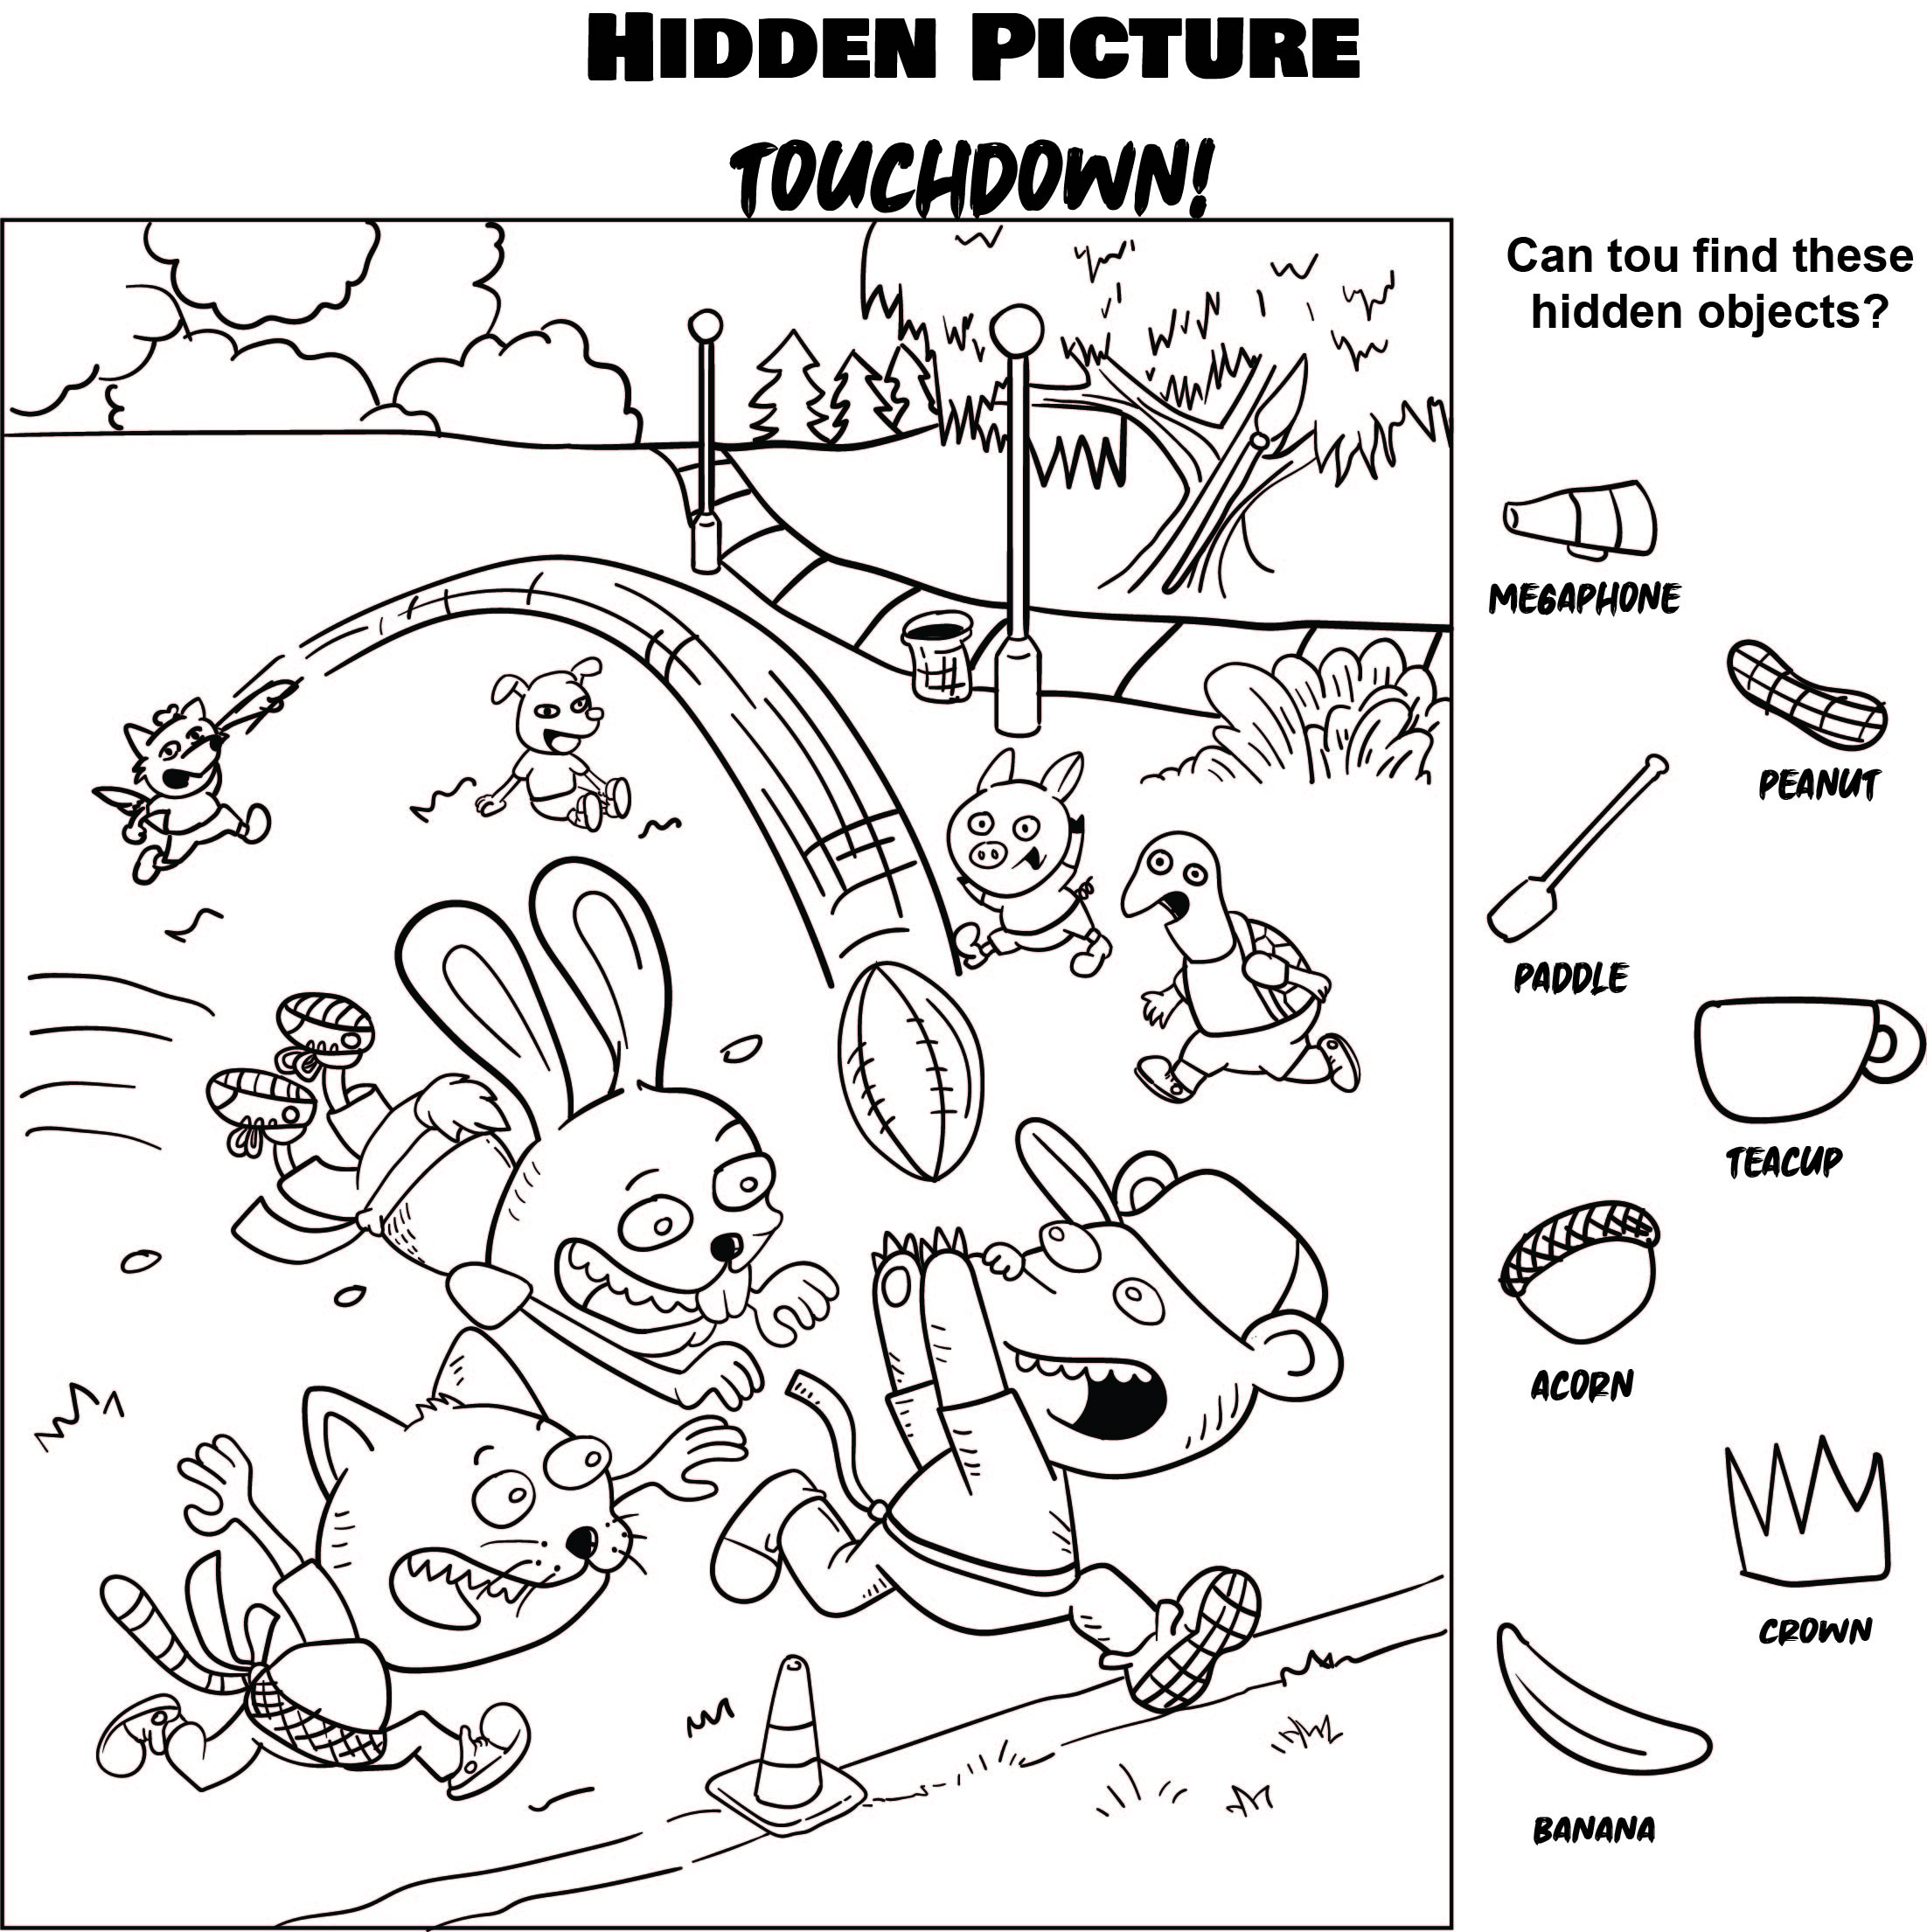 4 Best Images of Highlight Picture Hidden Objects Printable Free